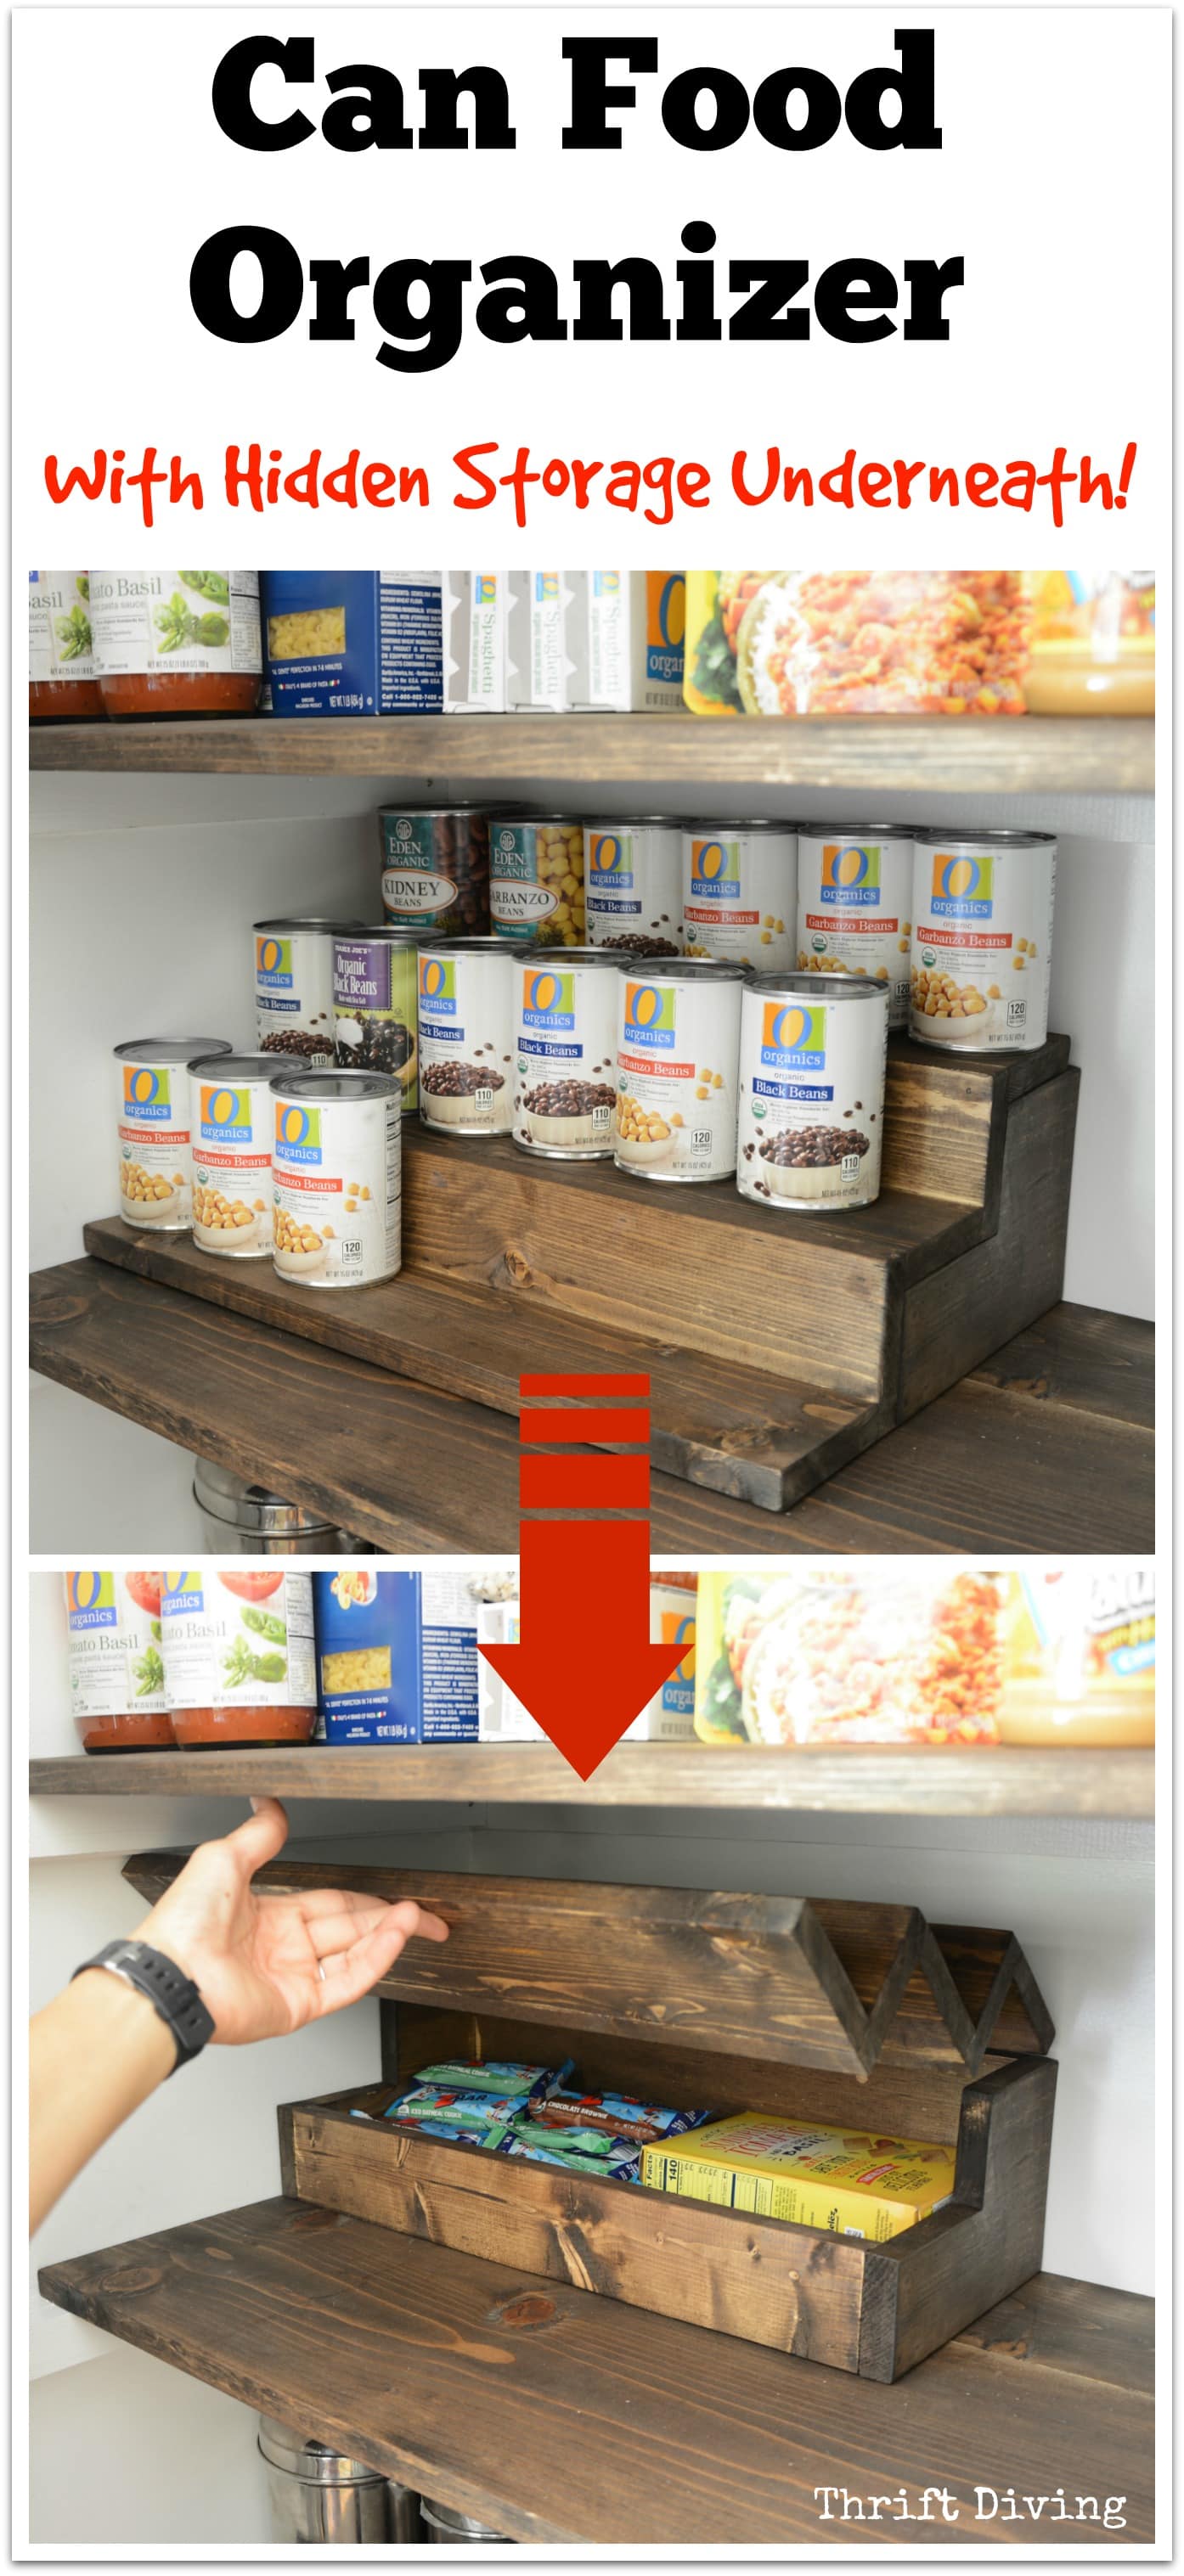 https://thriftdiving.com/wp-content/uploads/2017/10/Can-food-organizer-for-the-pantry-with-hidden-storage-underneath-Thrift-Diving-Blog.jpg